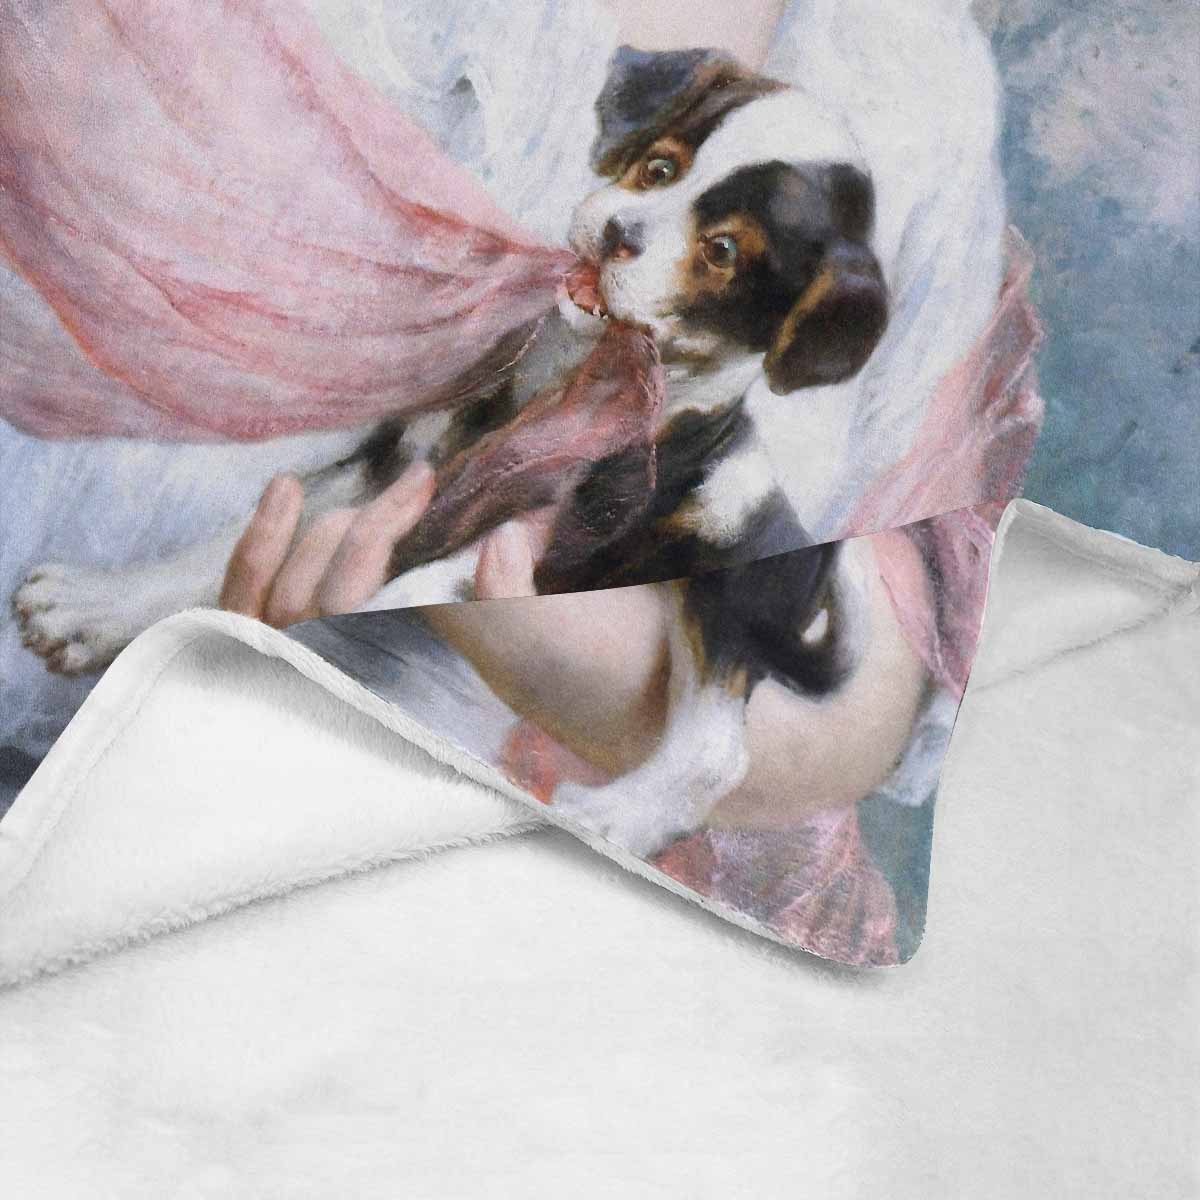 Victorian Lady Design BLANKET, LARGE 60 in x 80 in, The Mischievous Puppy